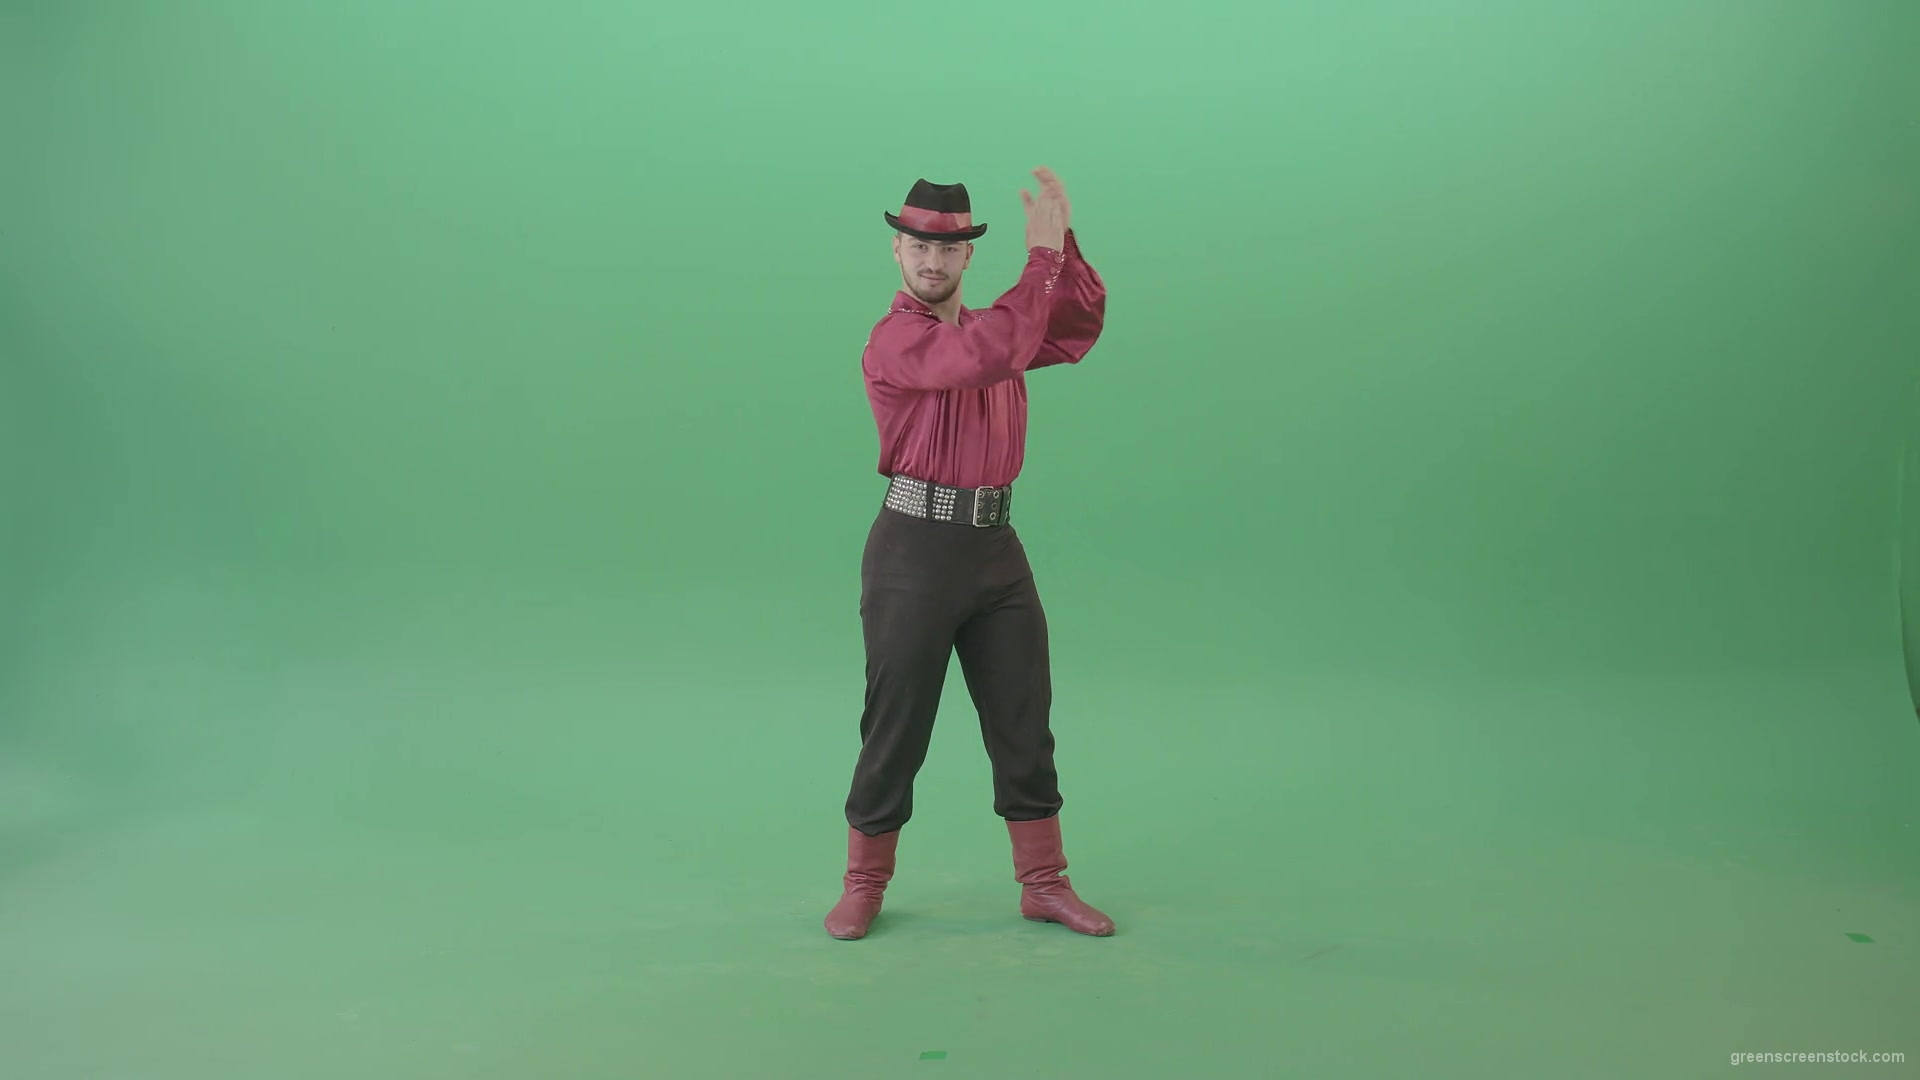 Modovian-Balkan-Gipsy-man-clapping-hands-isolalated-on-green-screen-4K-Video-Footage-1920_006 Green Screen Stock